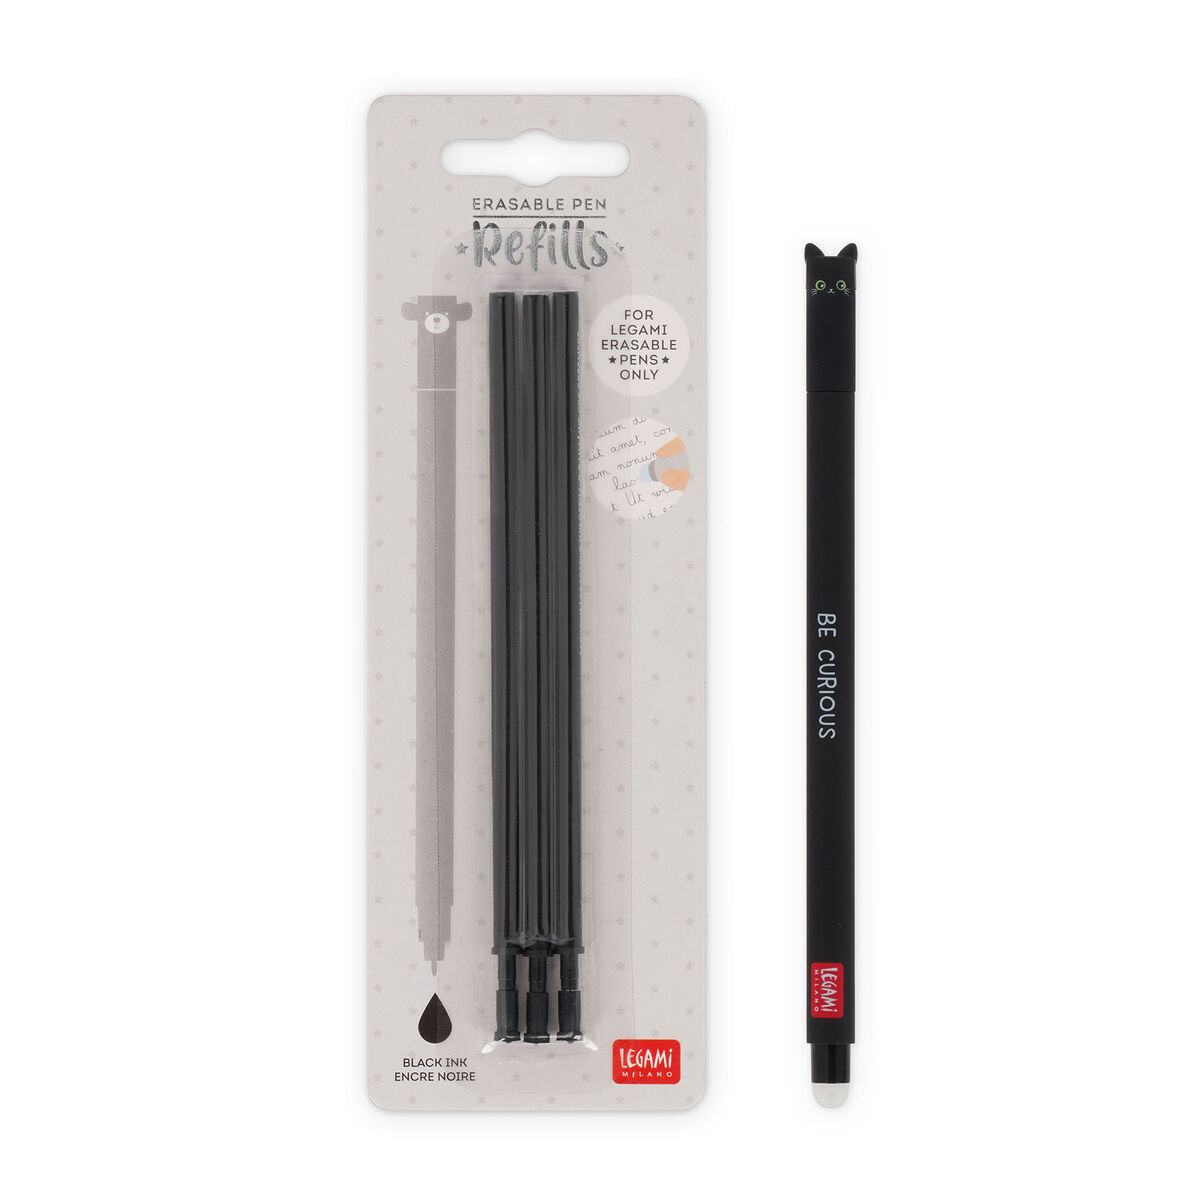 Stylo porte gomme rechargeable R2570 - Sitpec Negoce